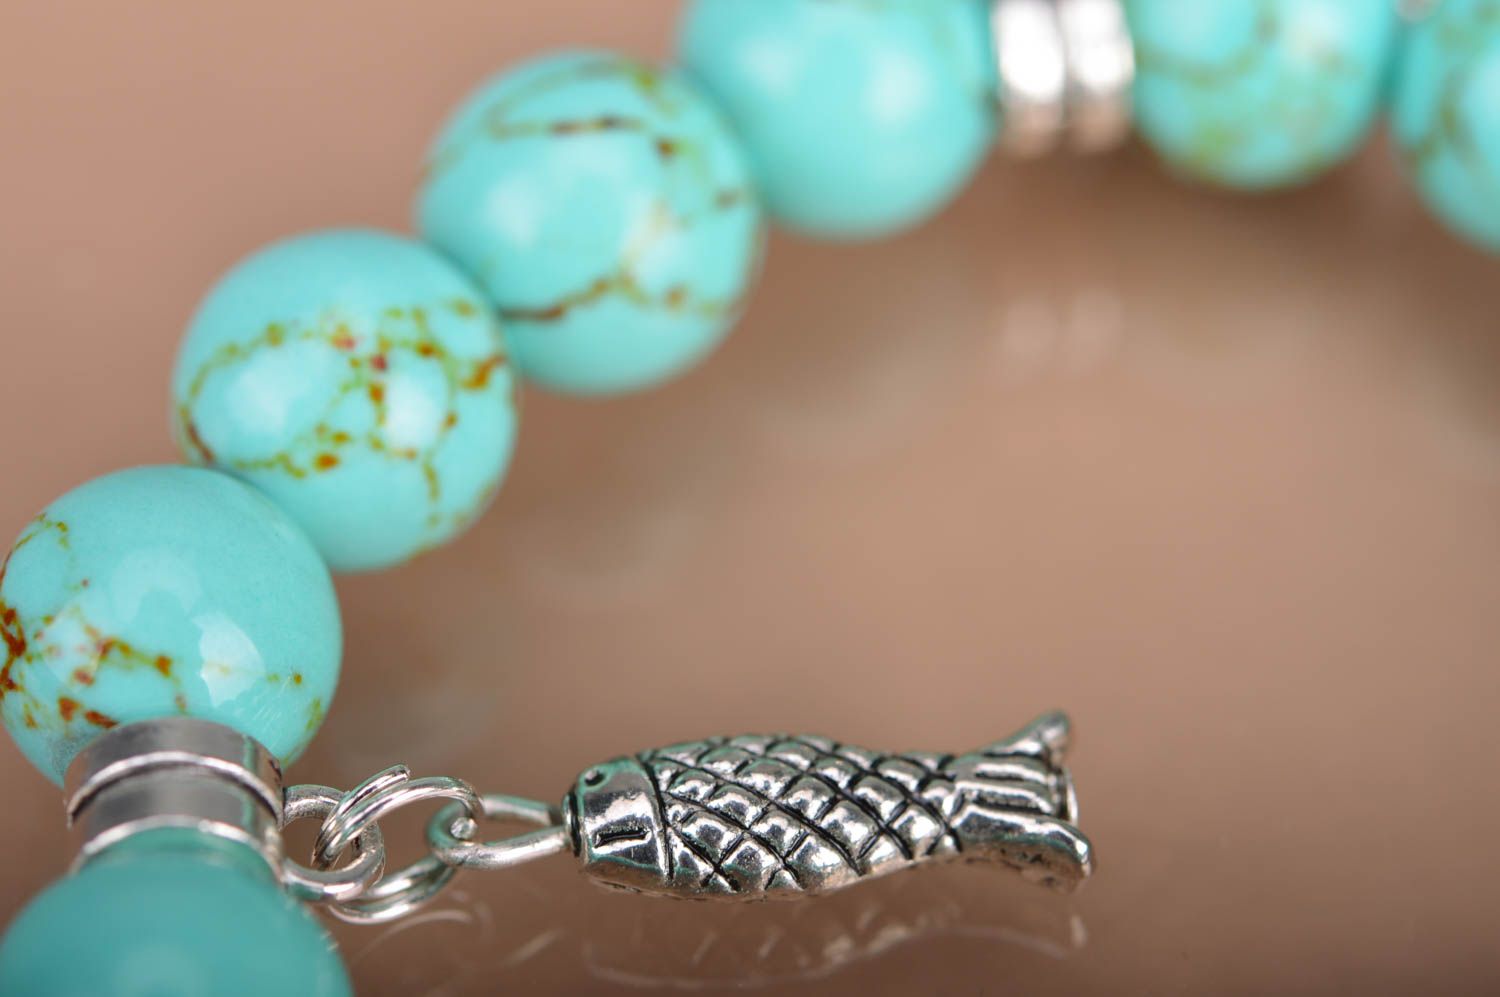 Handmade beaded wrist bracelet styled on turquoise with metal charms fish leaves photo 4